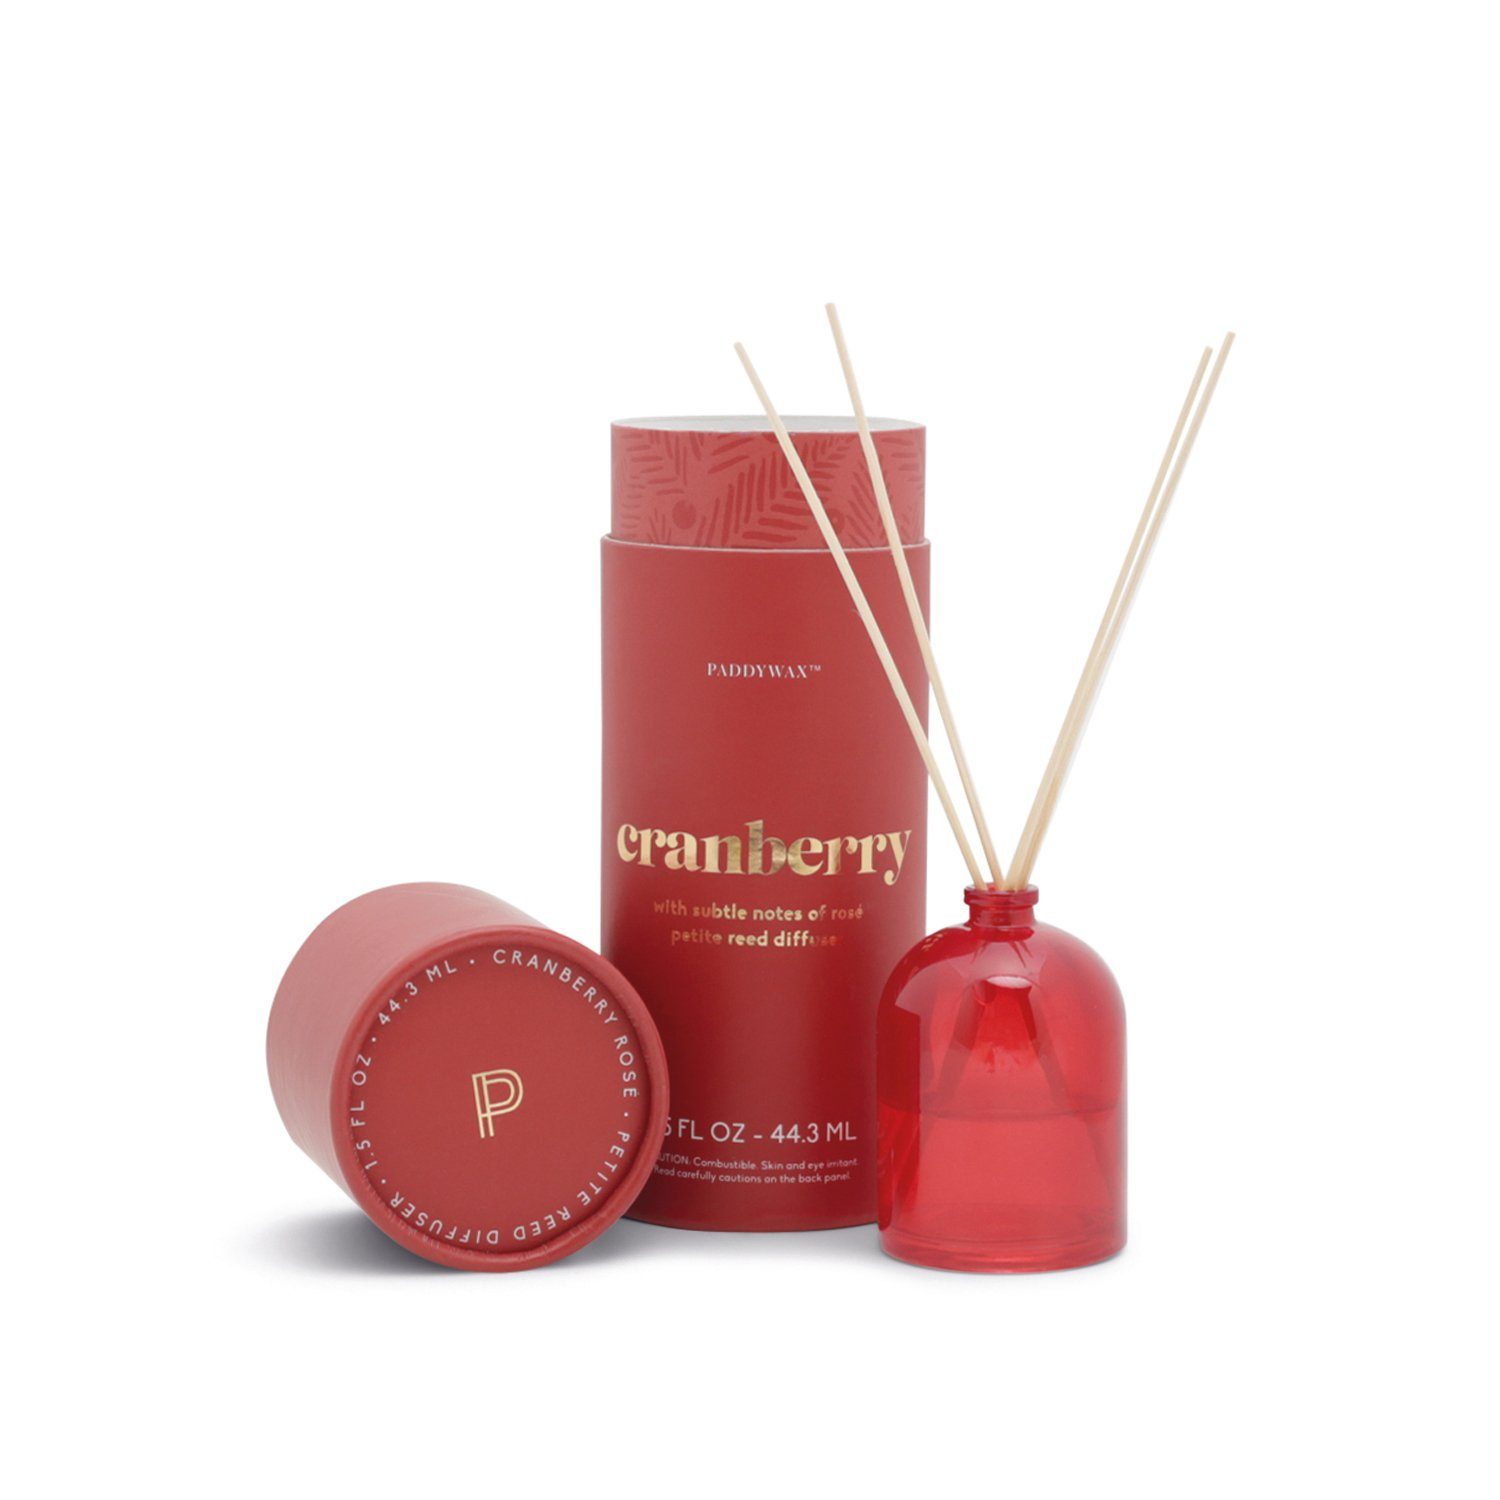 Paddywax Petite Reed Diffuser in Cranberry Scent